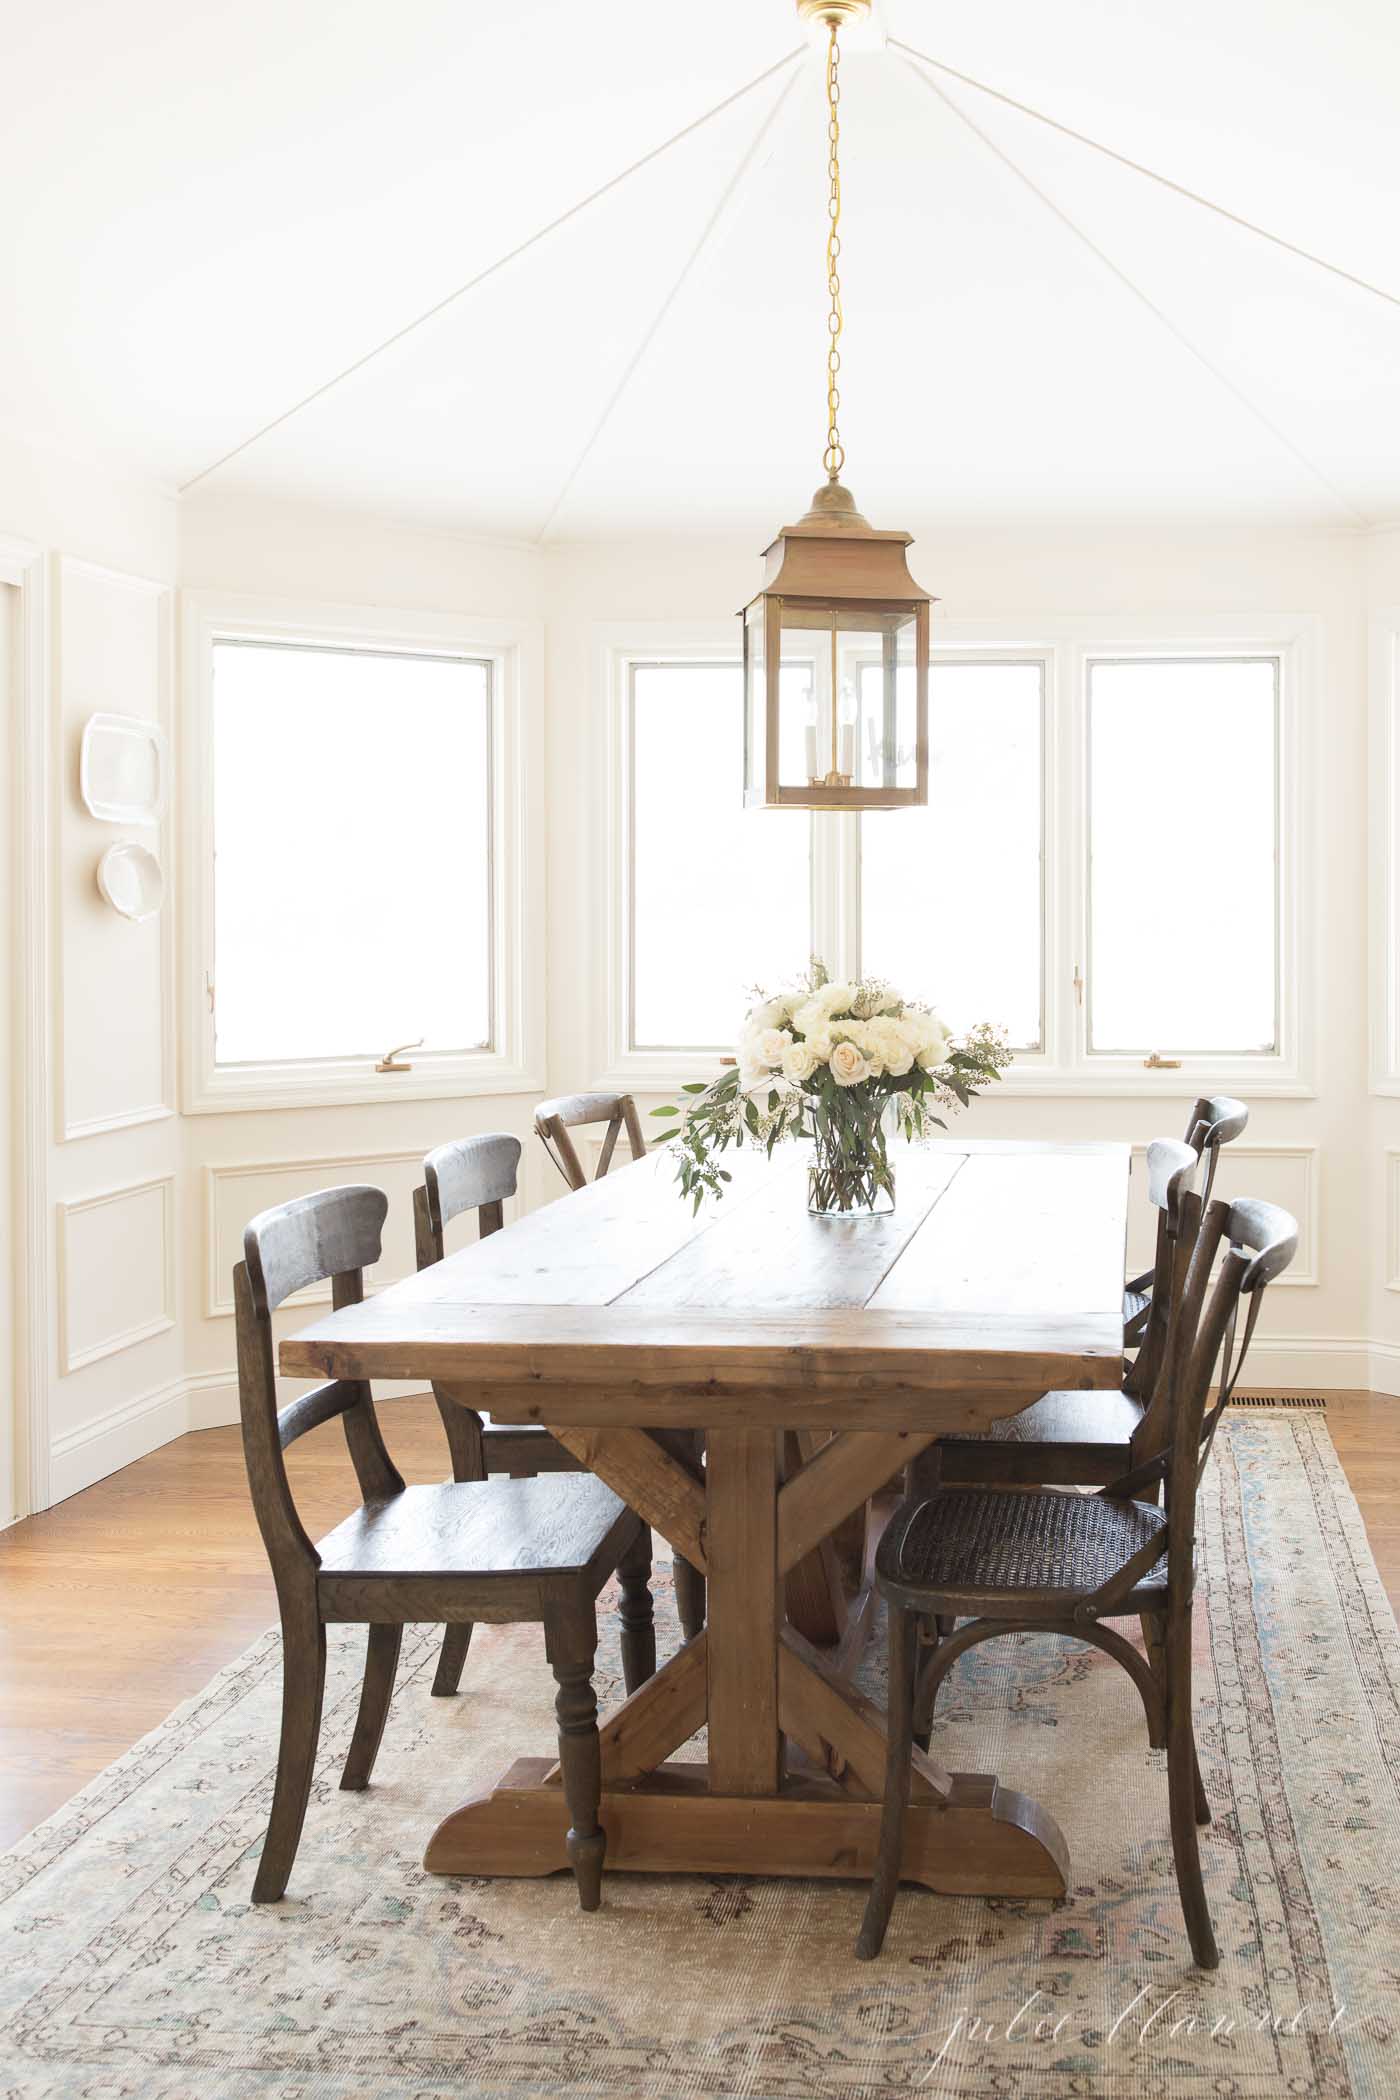 breakfast nook table with mixed eclectic wooden chairs and a brass lantern hanging above.